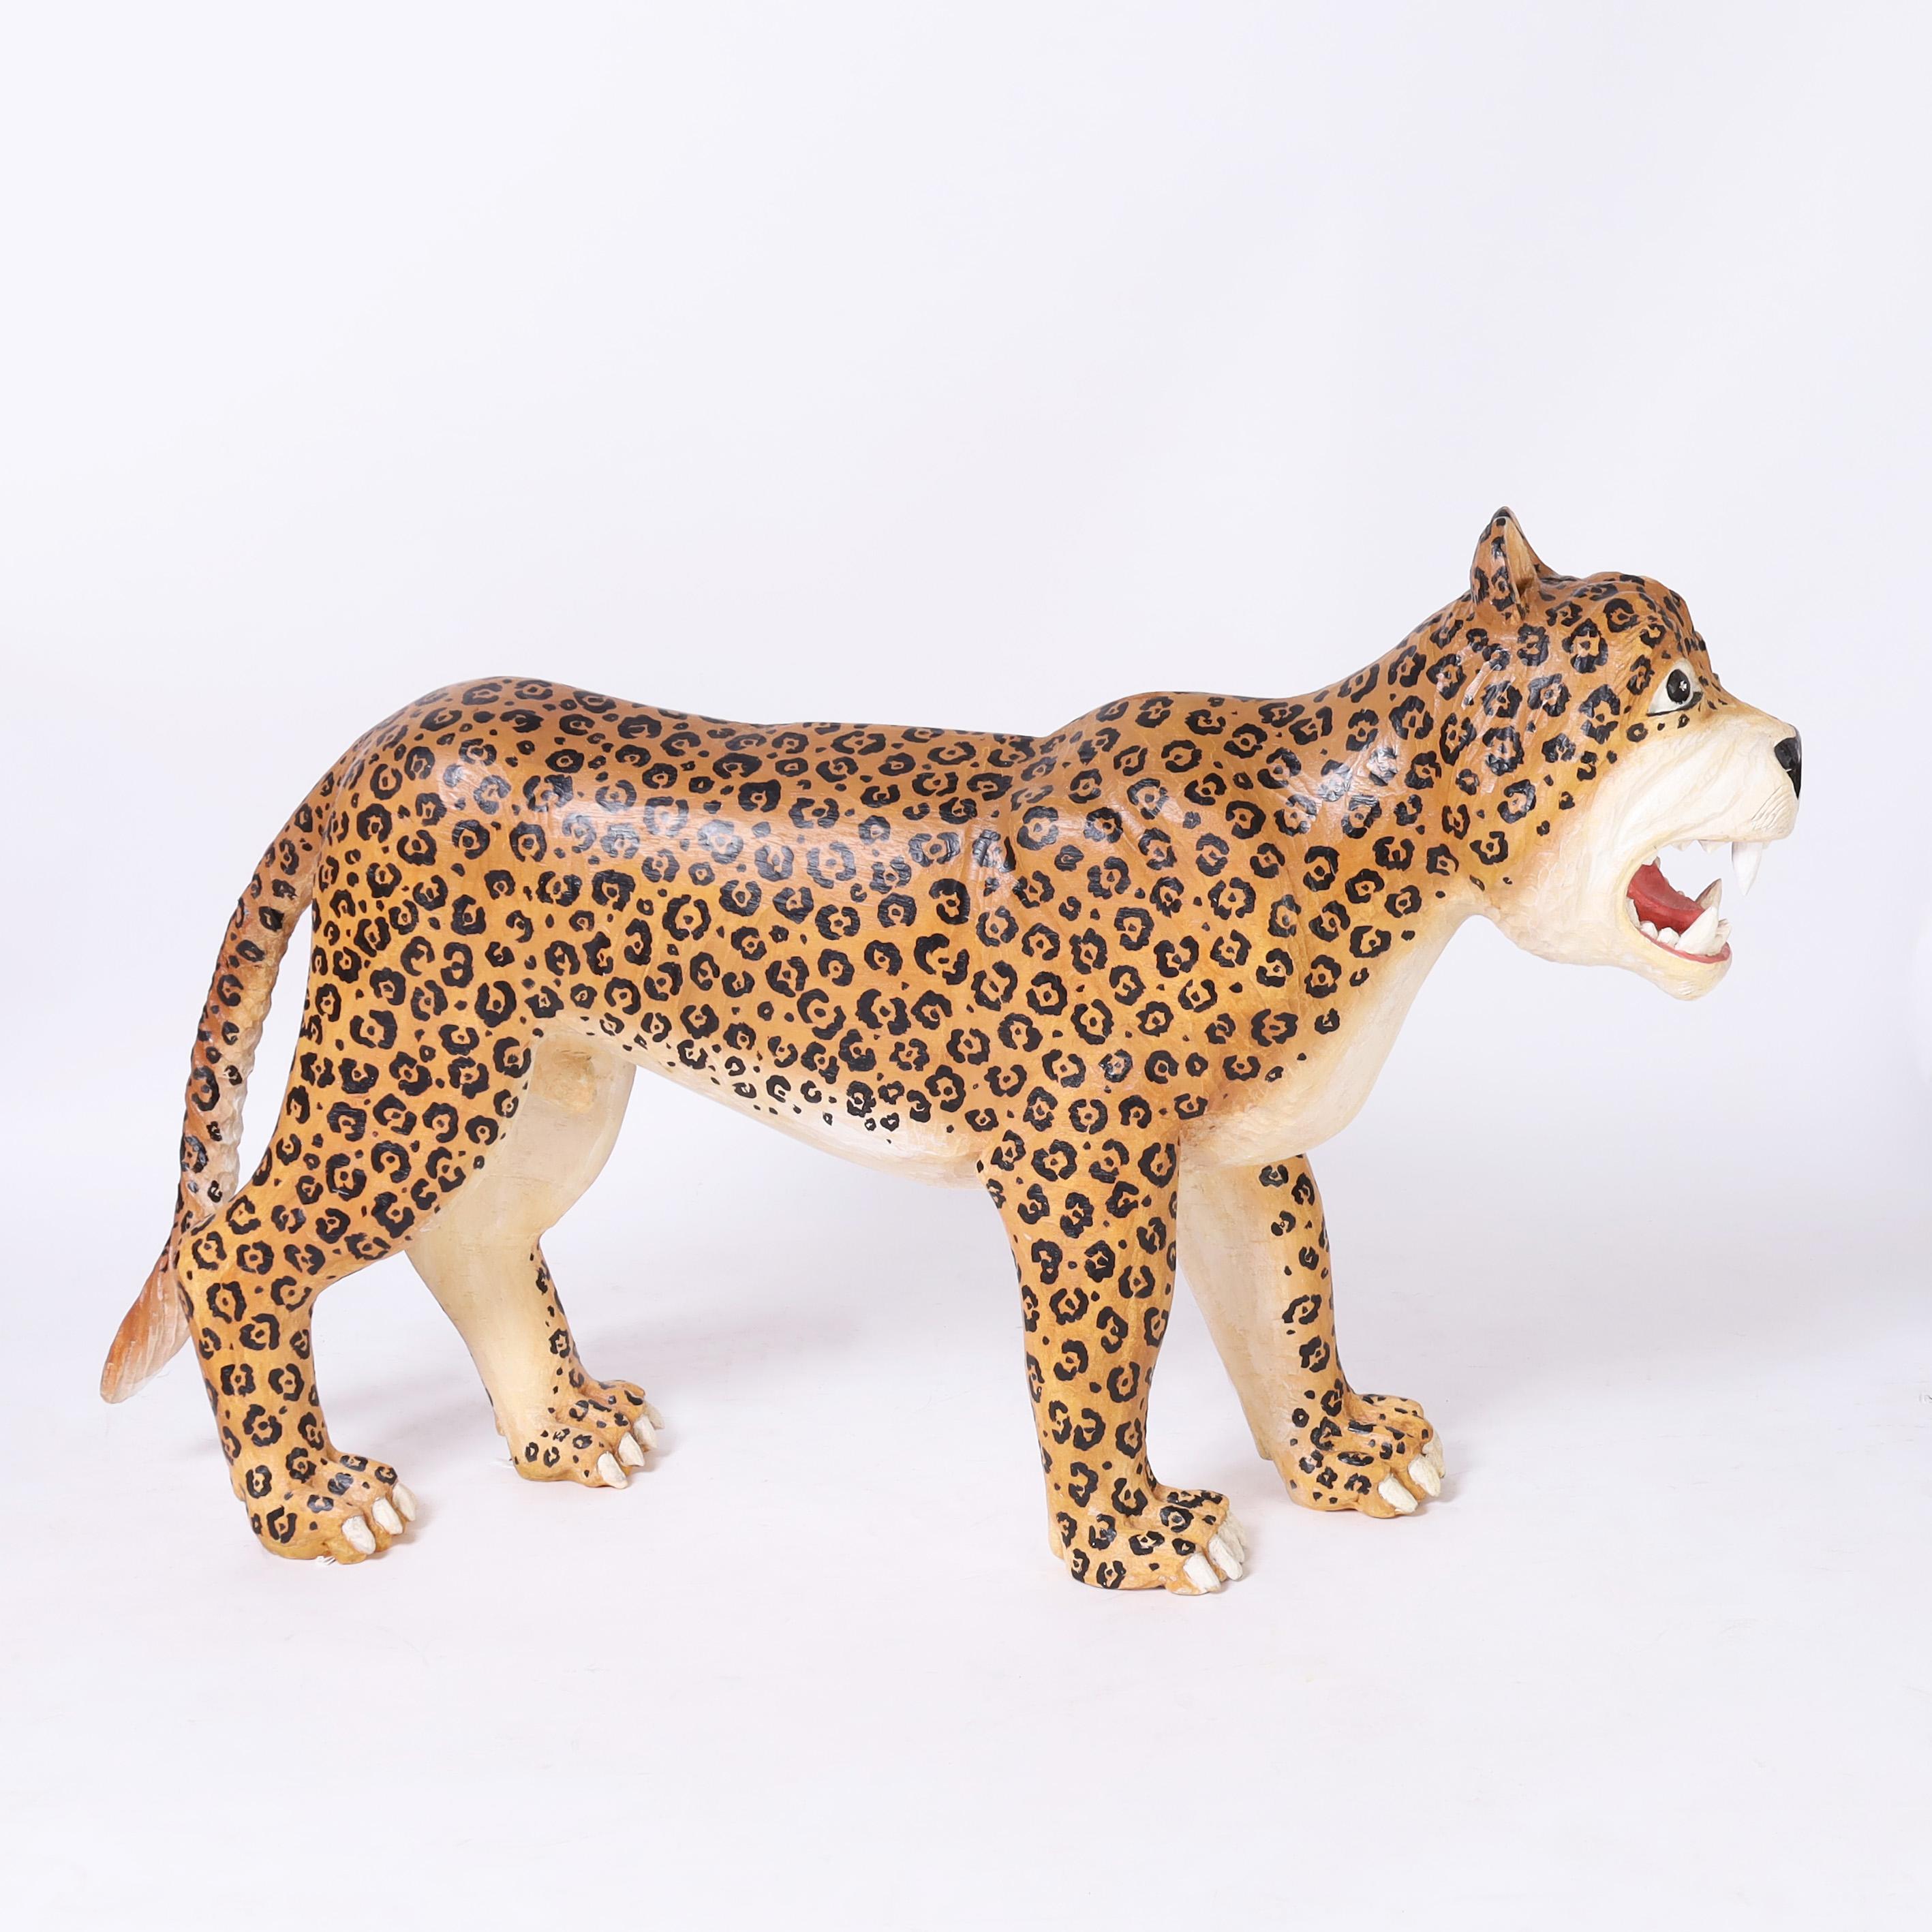 Standout whimsical vintage life size hand carved jaguar decorated with its distinctive rosettes in a faux fierce expression.